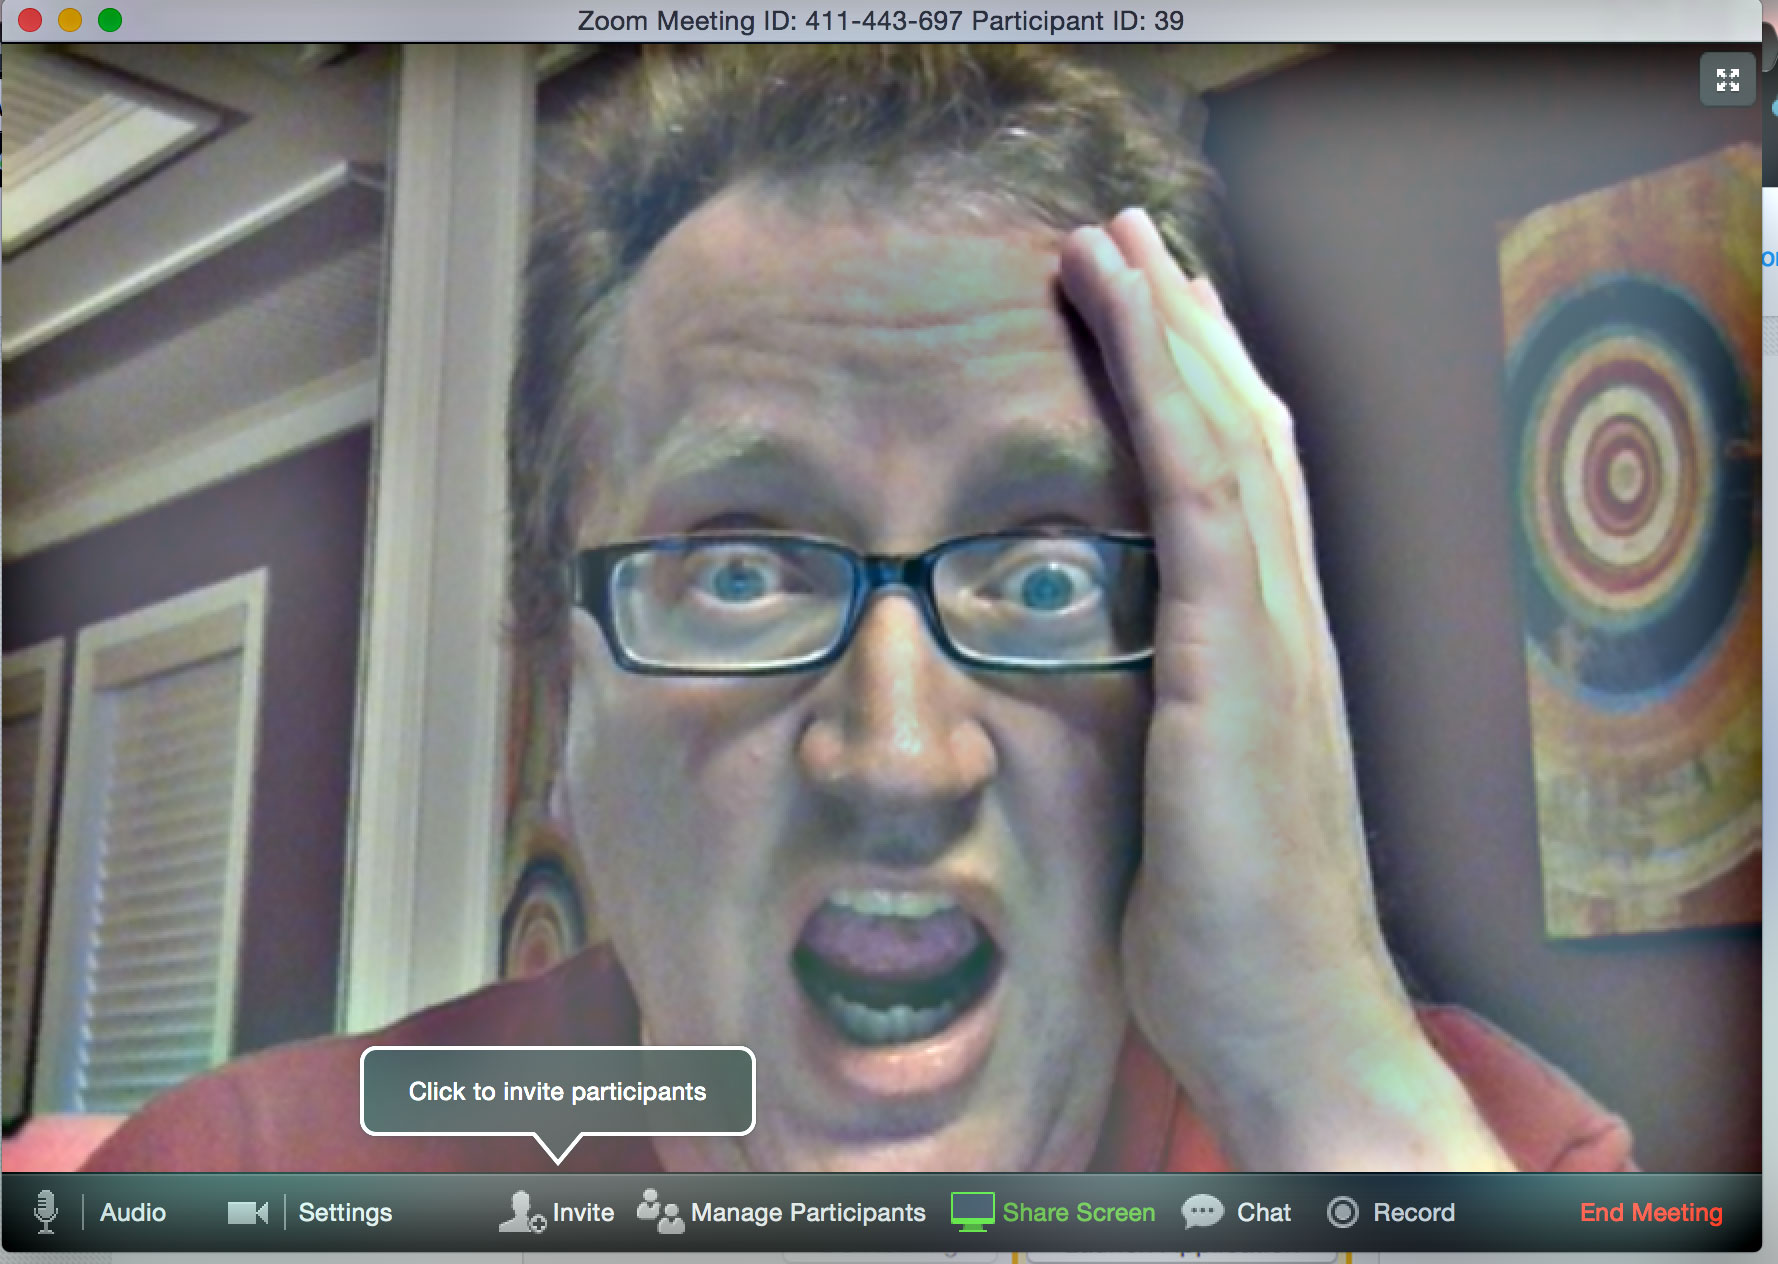 Video conferencing is awful… I mean awesome… no, awful… aww shucks.